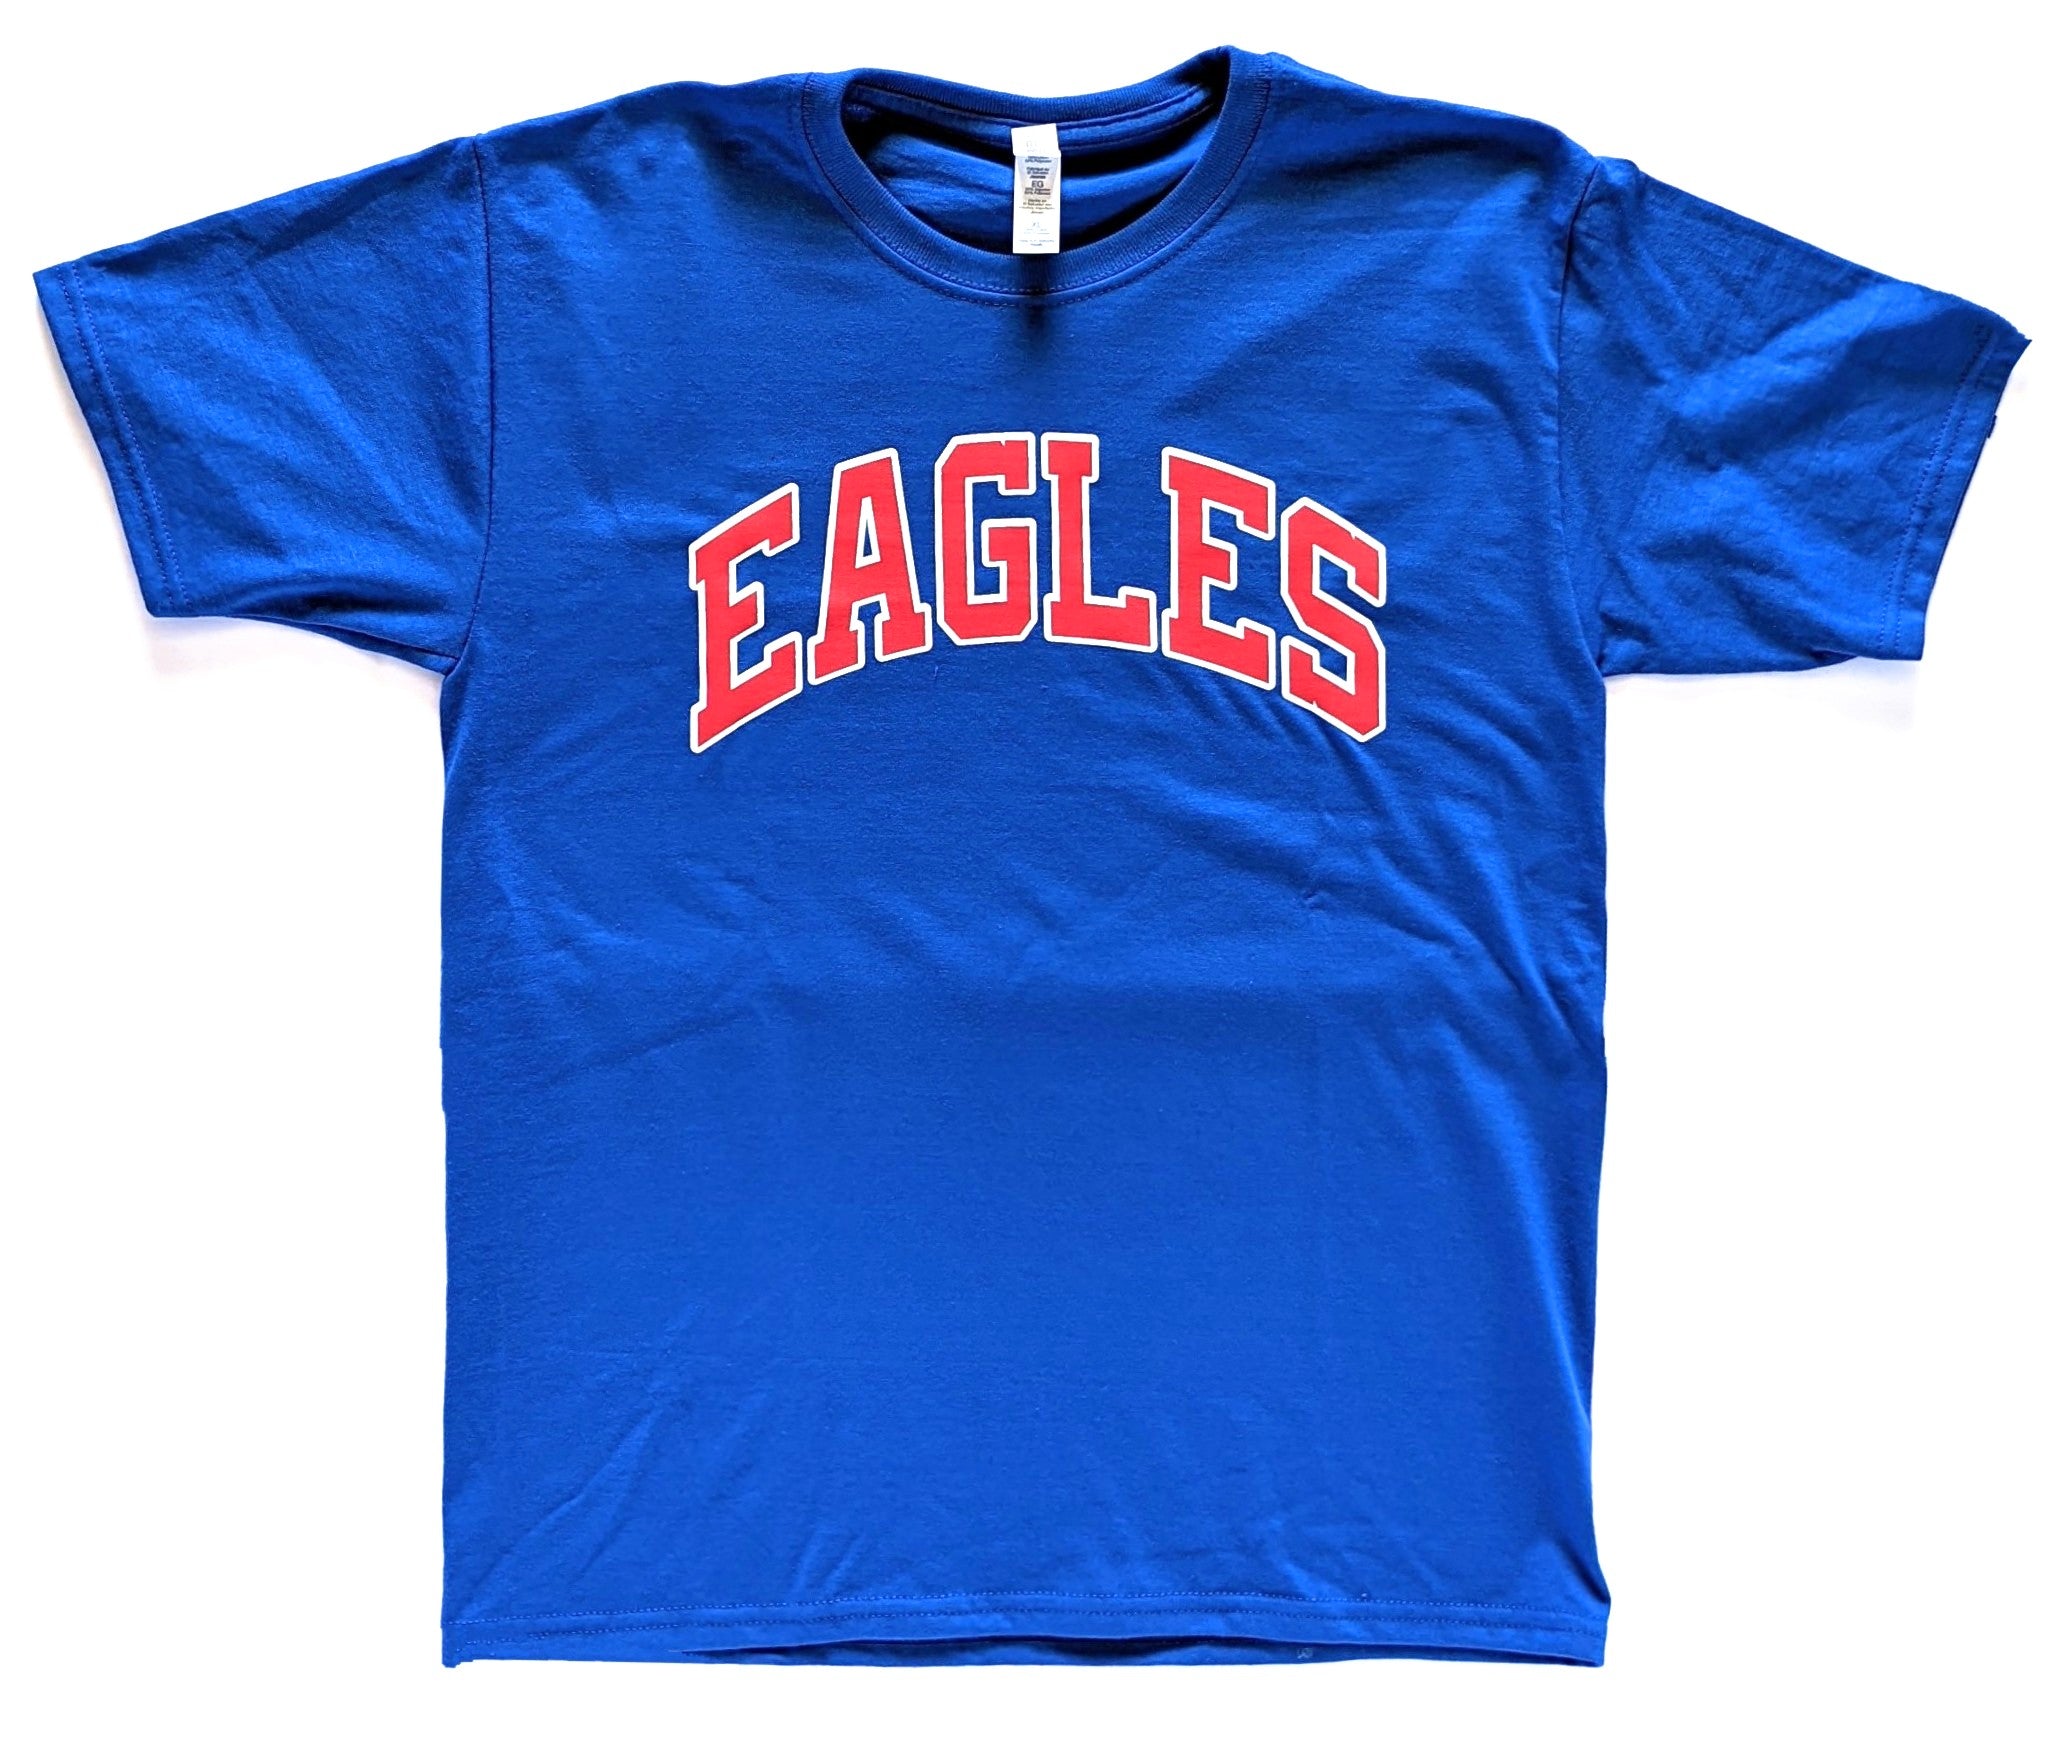 Eagles Arch Tee – House of Awards and Sports